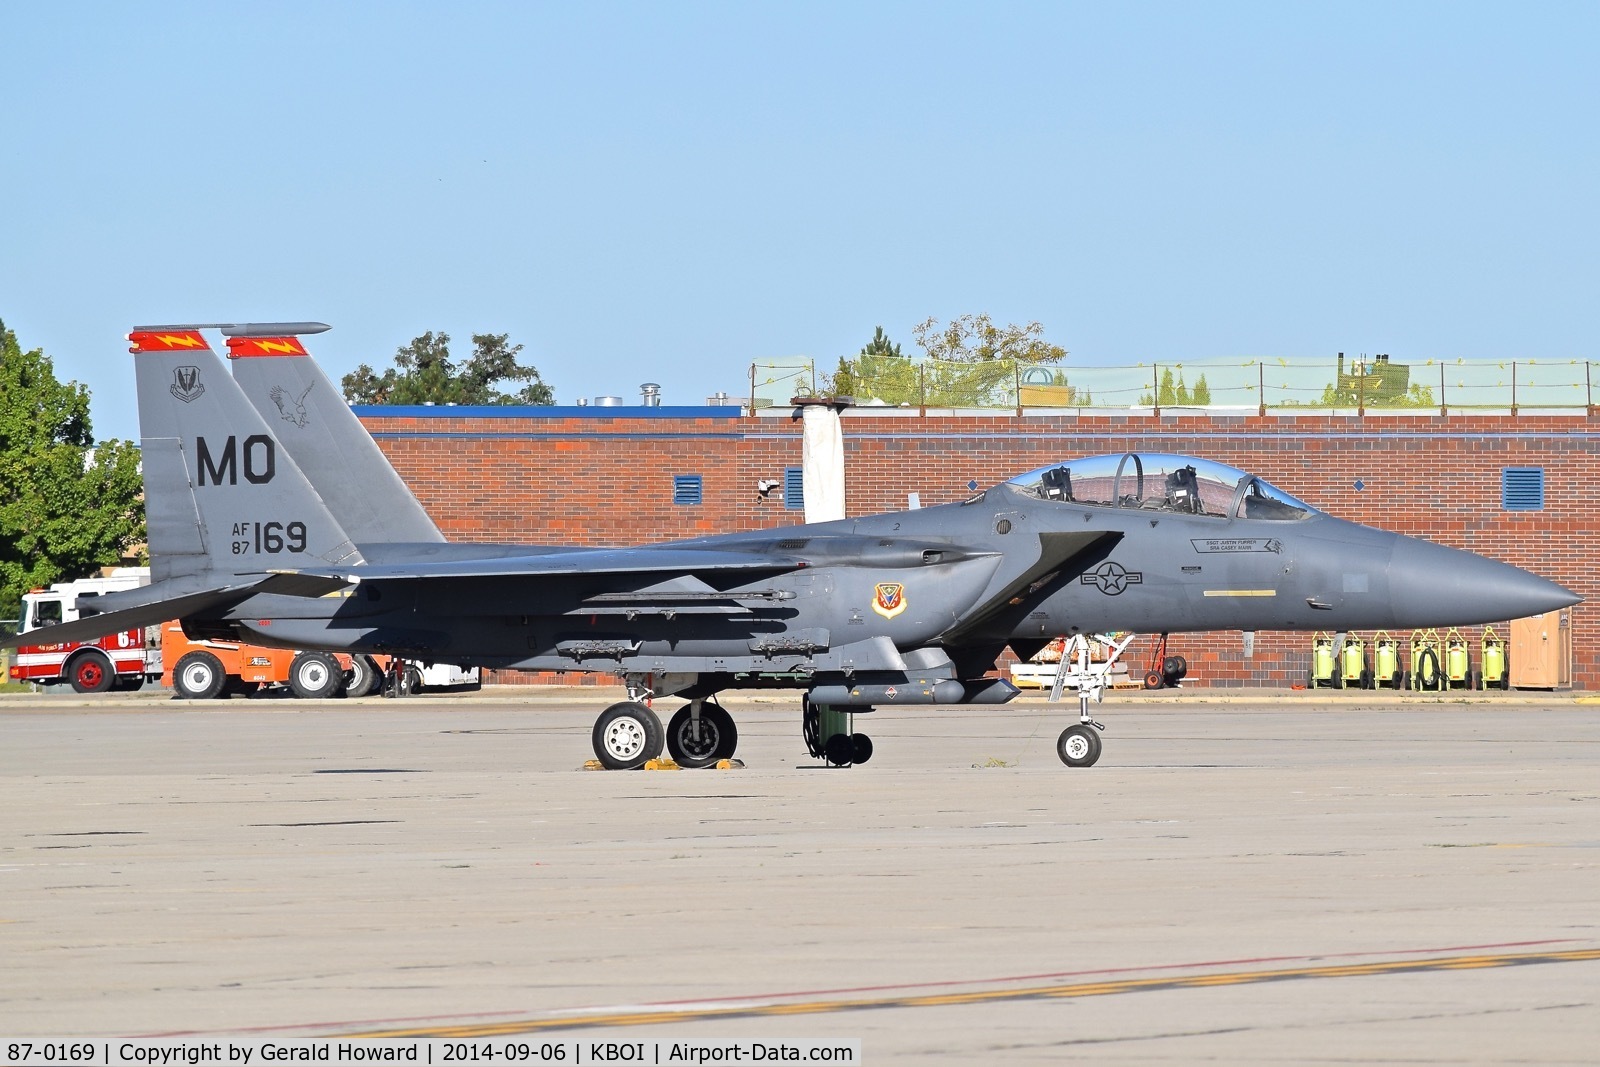 87-0169, 1987 McDonnell Douglas F-15E Strike Eagle C/N 1034/E009, Parked on the Idaho ANG ramp. 389TH Fighter Sq. 